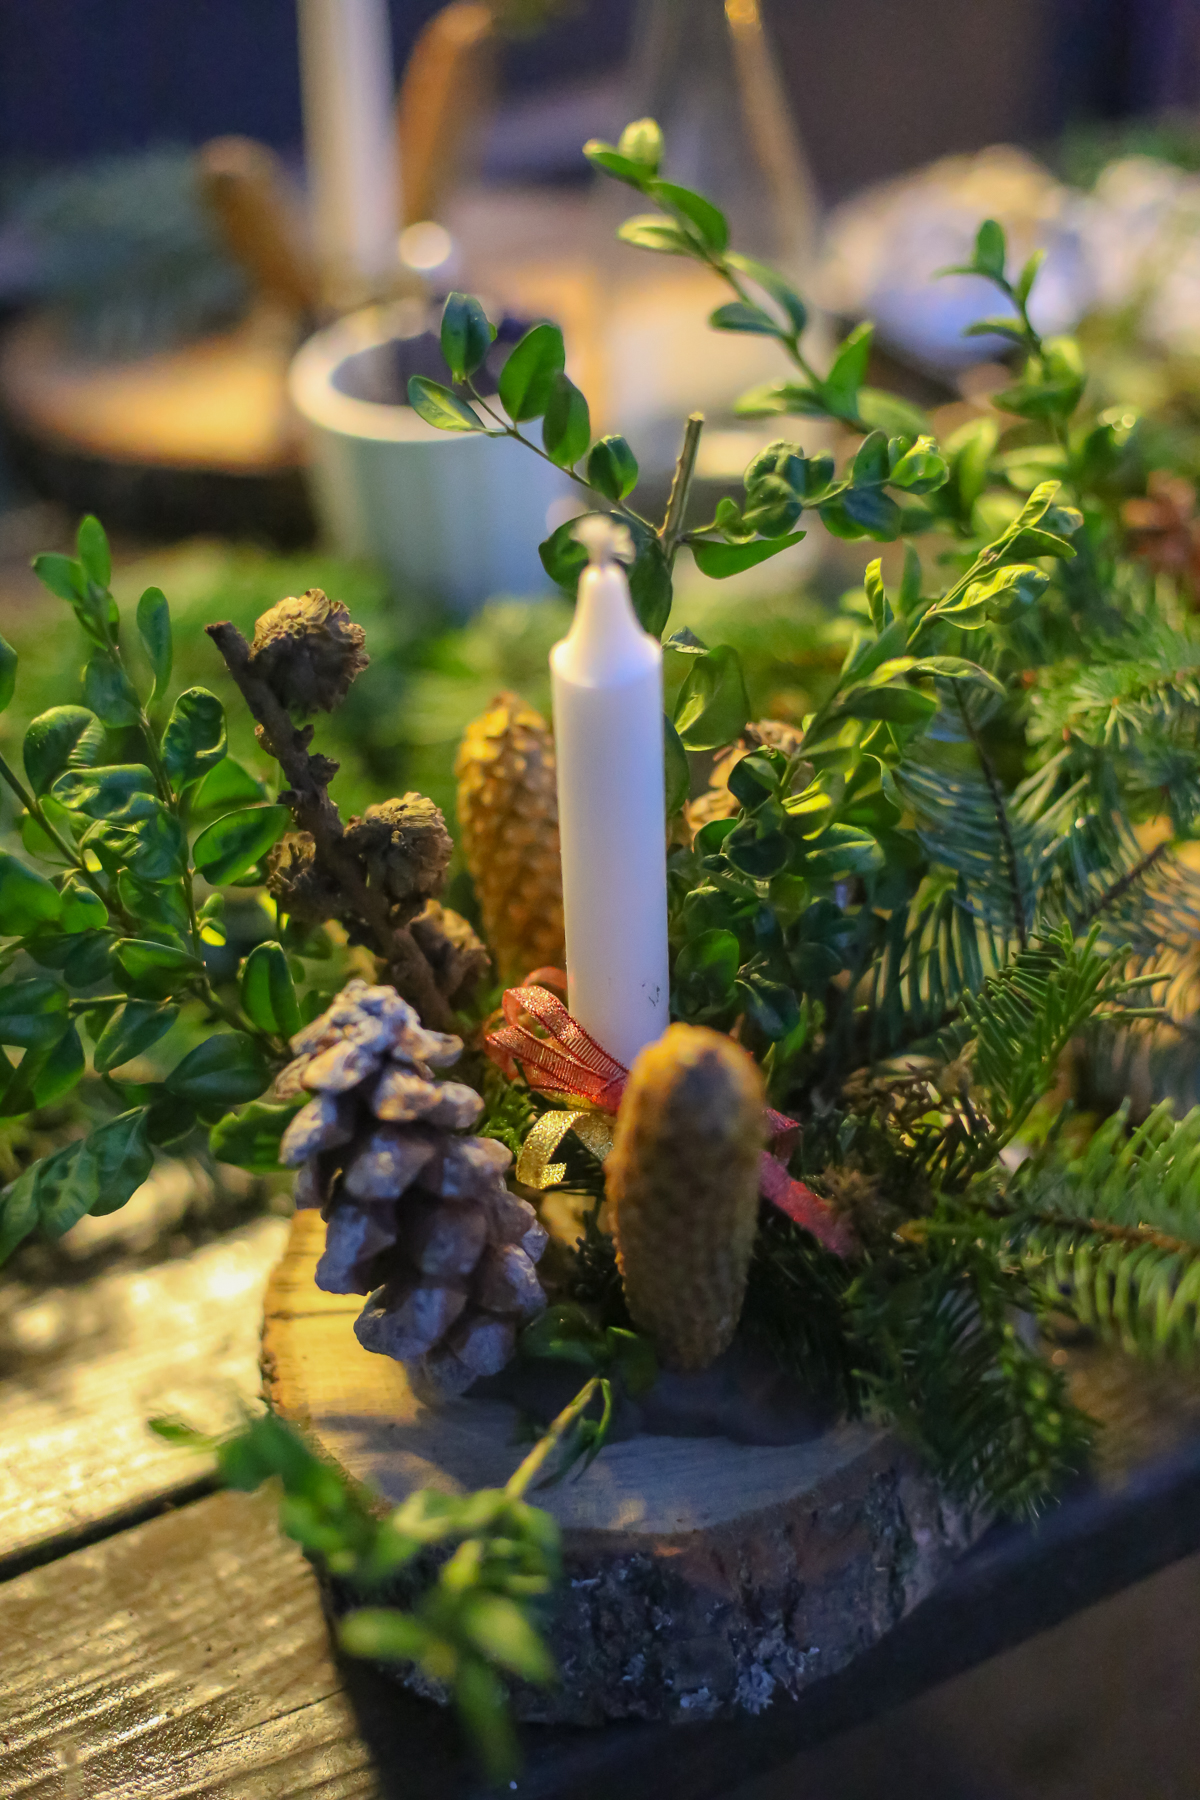 The forest school celebrates the Christmast holidays with plenty of nature and hygge.